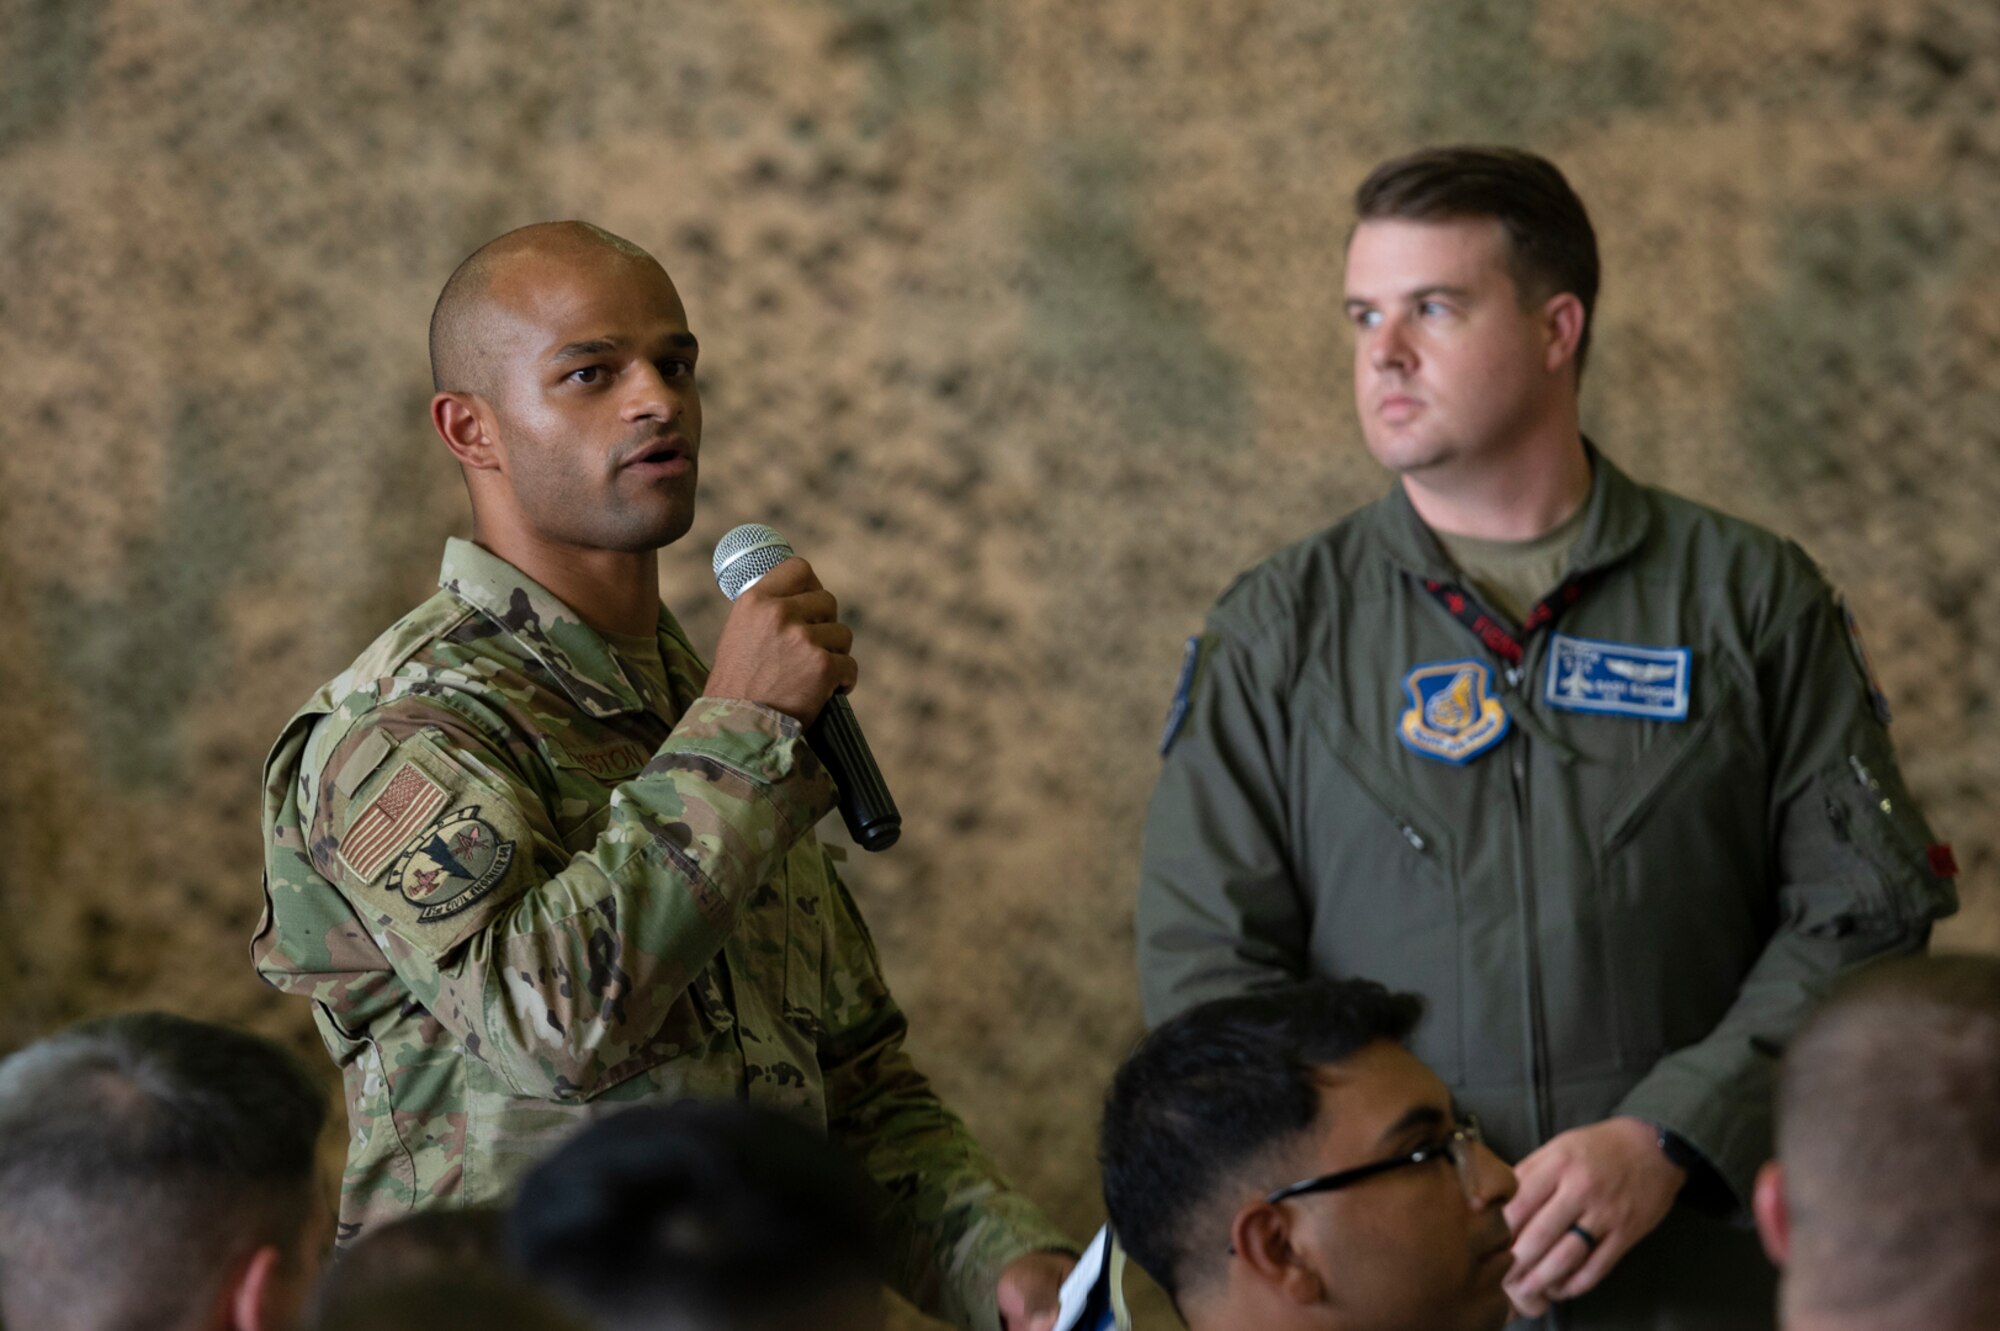 An Airman assigned to the 51st Fighter Wing asks Air Force Chief of Staff Gen. CQ Brown, Jr., a question during the Q&A portion of an all-call at Osan Air Base, Republic of Korea, Aug. 12, 2022.